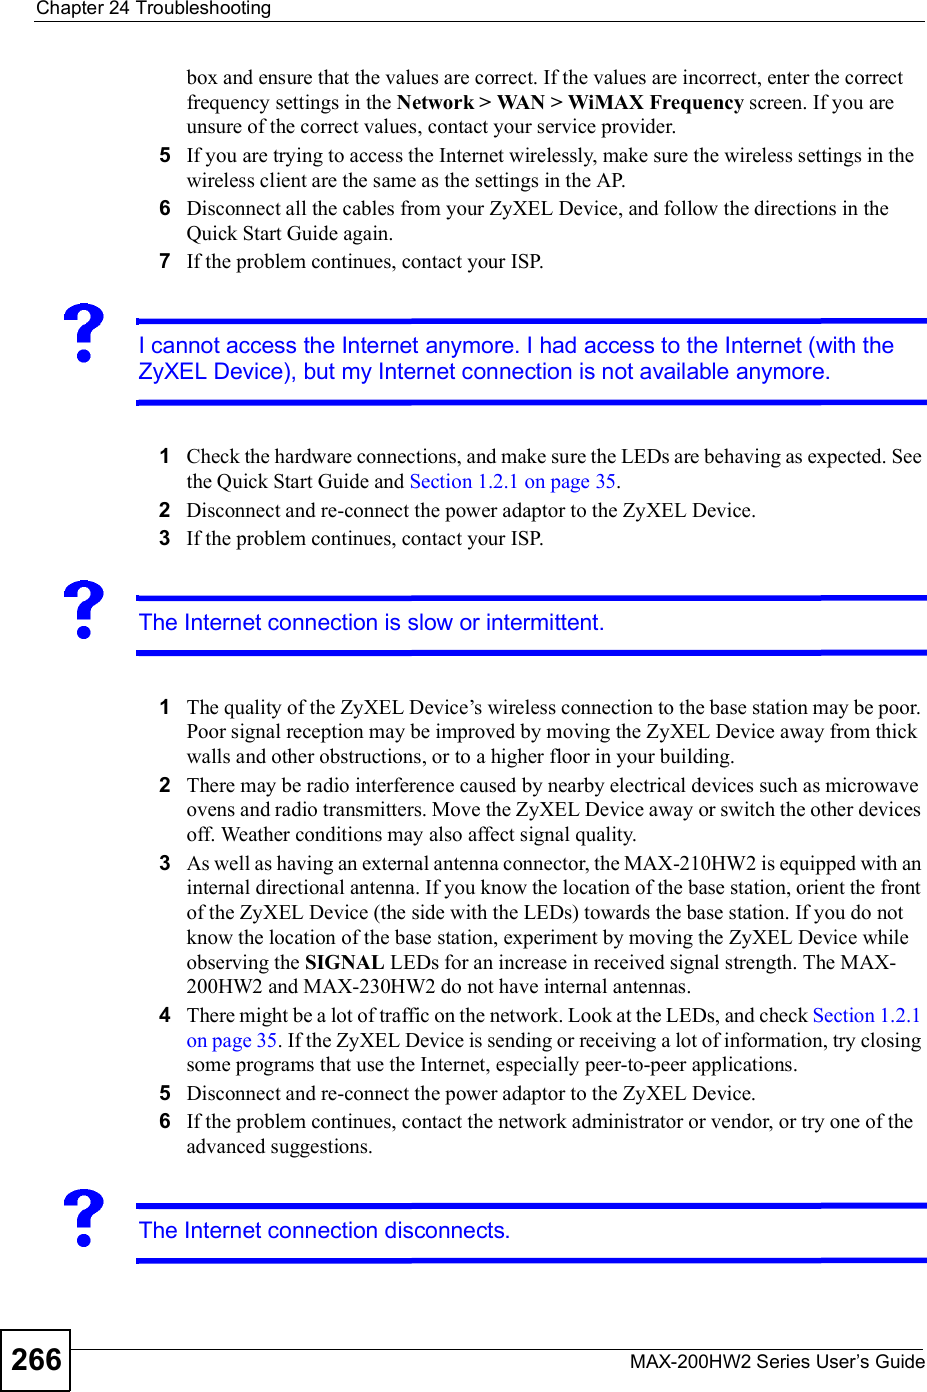 Chapter 24TroubleshootingMAX-200HW2 Series User s Guide266box and ensure that the values are correct. If the values are incorrect, enter the correct frequency settings in the Network &gt; WAN &gt; WiMAX Frequency screen. If you are unsure of the correct values, contact your service provider.5If you are trying to access the Internet wirelessly, make sure the wireless settings in the wireless client are the same as the settings in the AP.6Disconnect all the cables from your ZyXEL Device, and follow the directions in the Quick Start Guide again.7If the problem continues, contact your ISP.I cannot access the Internet anymore. I had access to the Internet (with the ZyXEL Device), but my Internet connection is not available anymore.1Check the hardware connections, and make sure the LEDs are behaving as expected. See the Quick Start Guide and Section 1.2.1 on page 35.2Disconnect and re-connect the power adaptor to the ZyXEL Device. 3If the problem continues, contact your ISP.The Internet connection is slow or intermittent.1The quality of the ZyXEL Device!s wireless connection to the base station may be poor. Poor signal reception may be improved by moving the ZyXEL Device away from thick walls and other obstructions, or to a higher floor in your building. 2There may be radio interference caused by nearby electrical devices such as microwave ovens and radio transmitters. Move the ZyXEL Device away or switch the other devices off. Weather conditions may also affect signal quality.3As well as having an external antenna connector, the MAX-210HW2 is equipped with an internal directional antenna. If you know the location of the base station, orient the front of the ZyXEL Device (the side with the LEDs) towards the base station. If you do not know the location of the base station, experiment by moving the ZyXEL Device while observing the SIGNAL LEDs for an increase in received signal strength. The MAX-200HW2 and MAX-230HW2 do not have internal antennas.4There might be a lot of traffic on the network. Look at the LEDs, and check Section 1.2.1 on page 35. If the ZyXEL Device is sending or receiving a lot of information, try closing some programs that use the Internet, especially peer-to-peer applications.5Disconnect and re-connect the power adaptor to the ZyXEL Device.6If the problem continues, contact the network administrator or vendor, or try one of the advanced suggestions.The Internet connection disconnects.